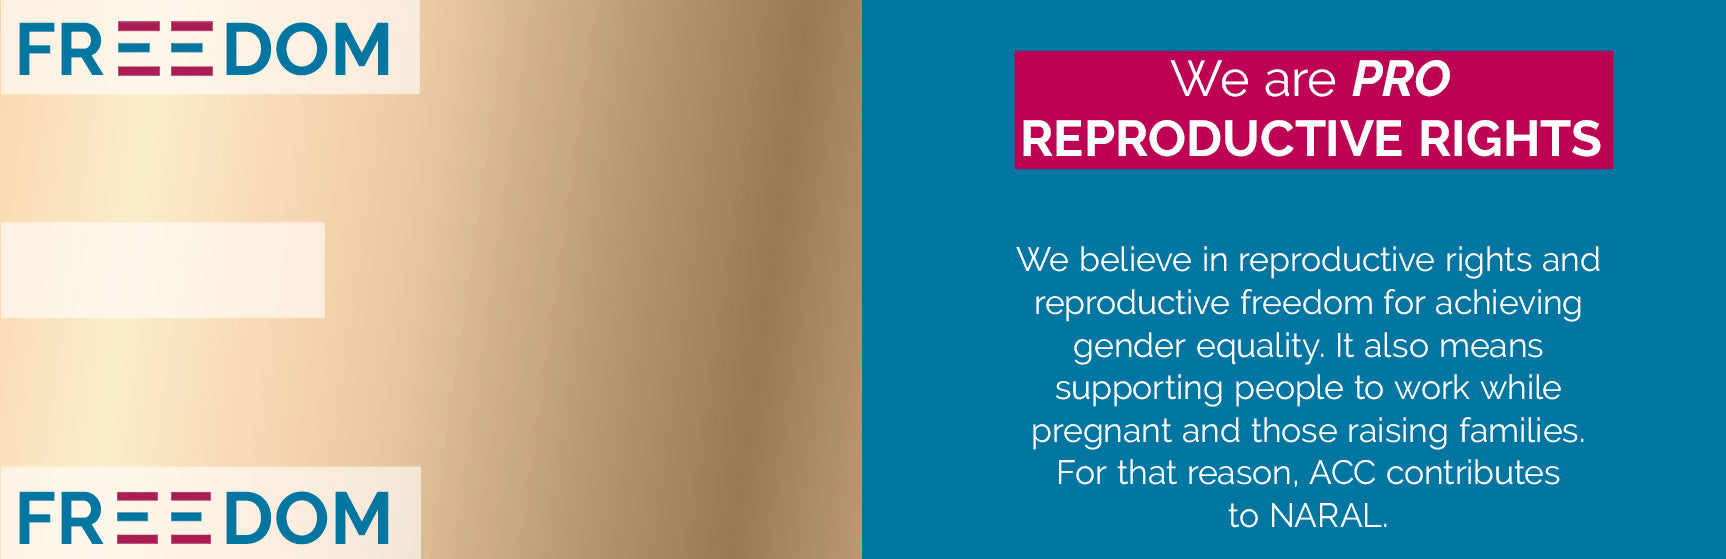 Freedom. Freedom. We are pro reproductive rights. We believe in reproductive rights and reproductive freedom for achieving gender equality. It also means supporting people to work while pregnant and those raising families. For that reason, ACC contributes to NARAL. 